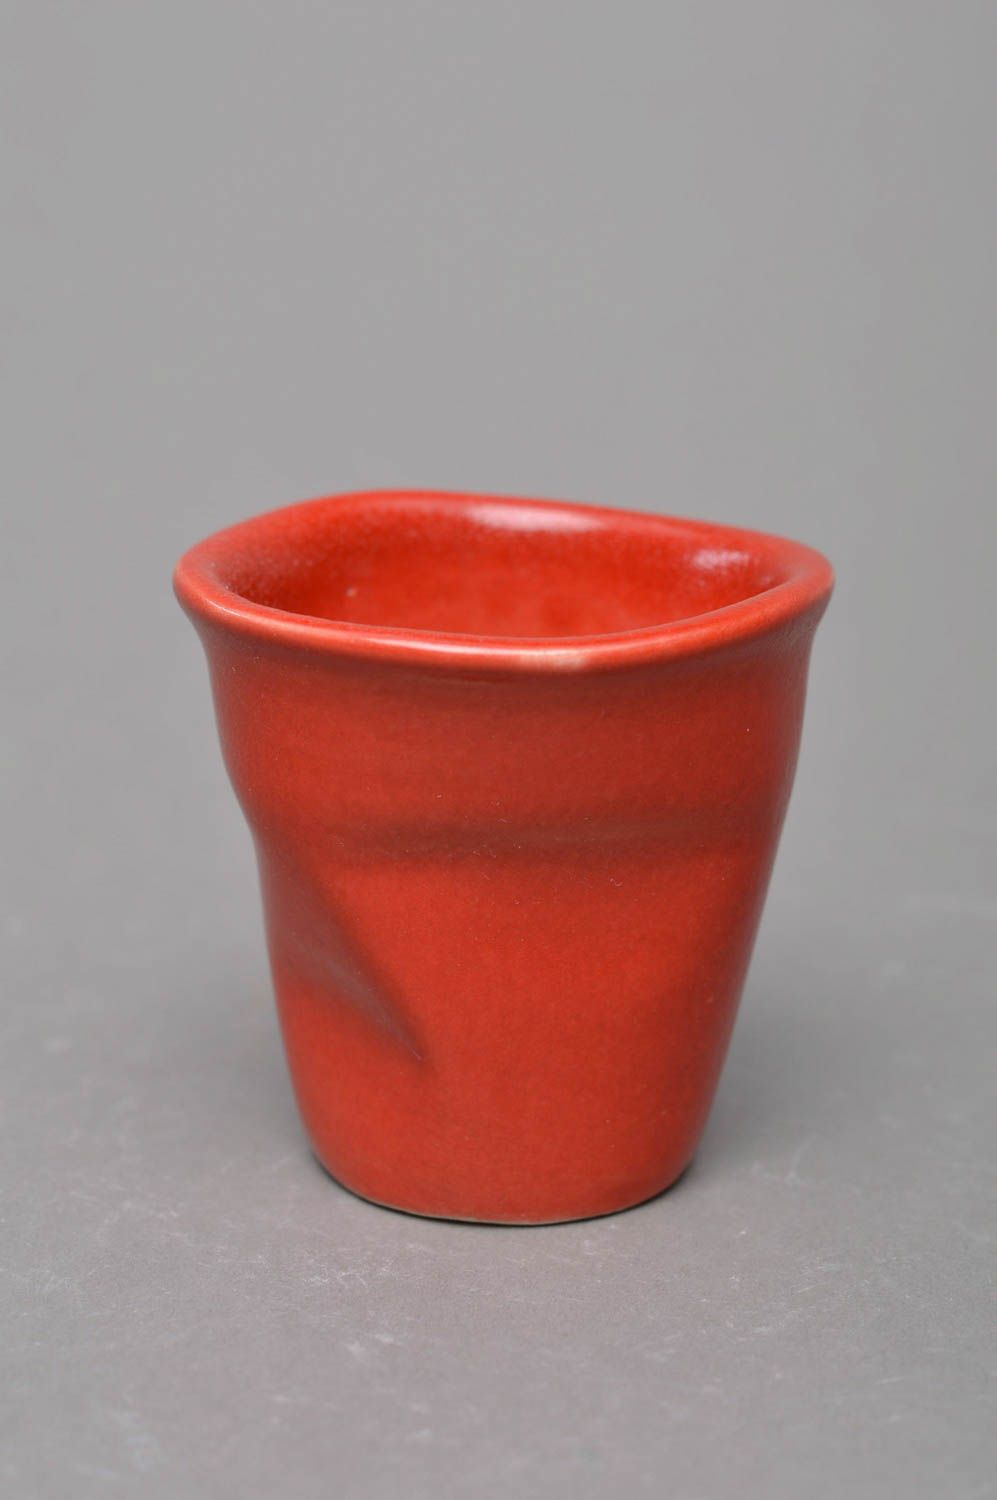 Small fake plastic porcelain crinkle 3 oz cup in red color with no handle photo 1